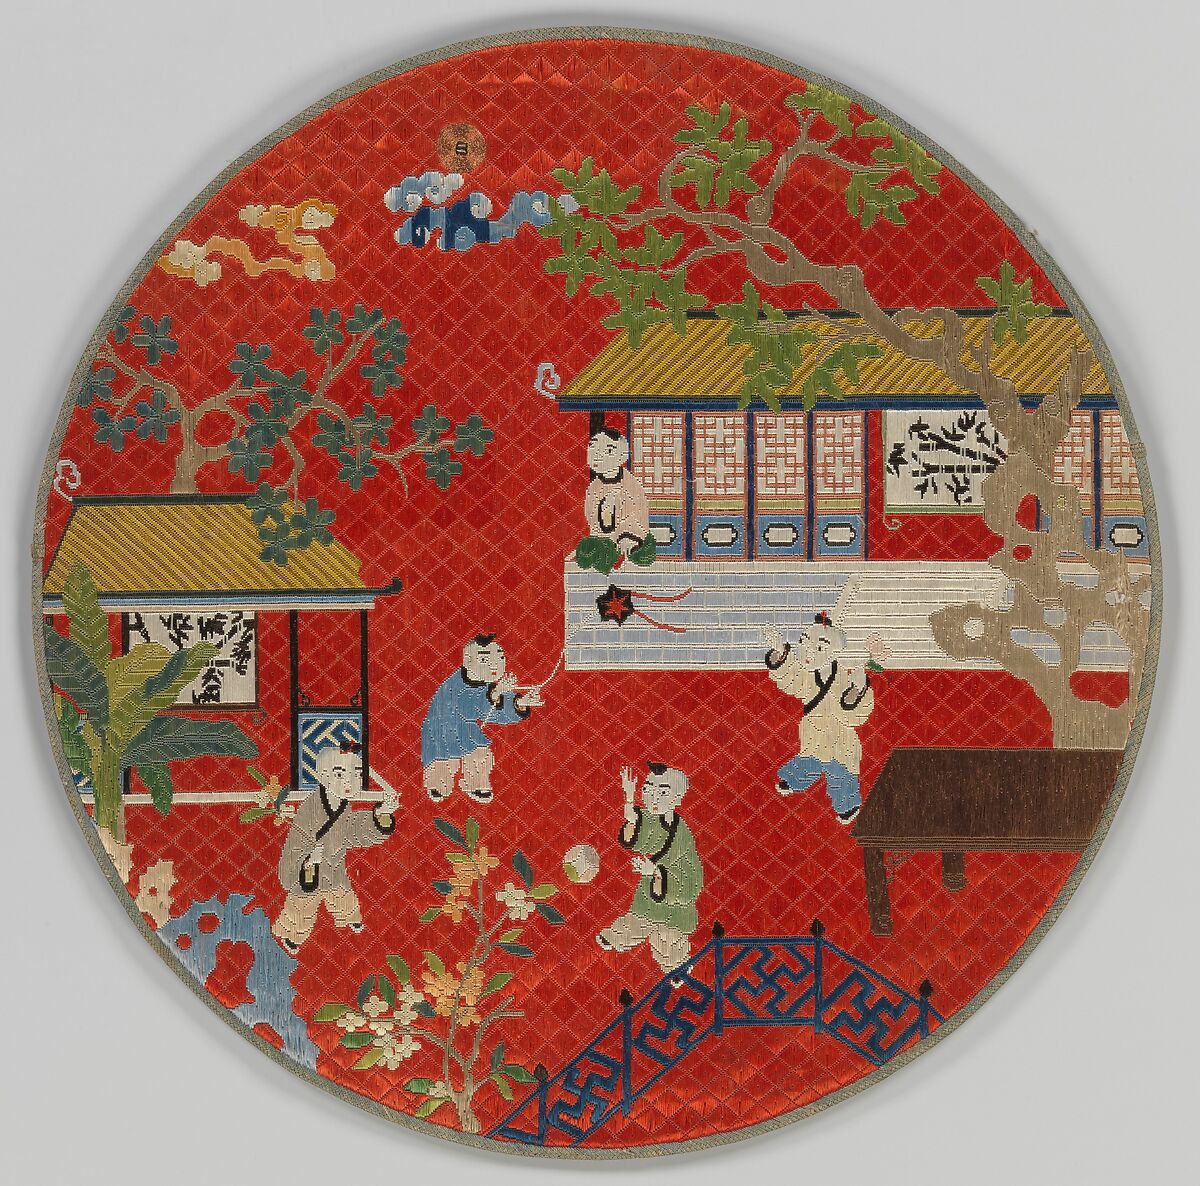 Mirror case with boys at play, Silk and metallic-thread embroidery on silk gauze, China 